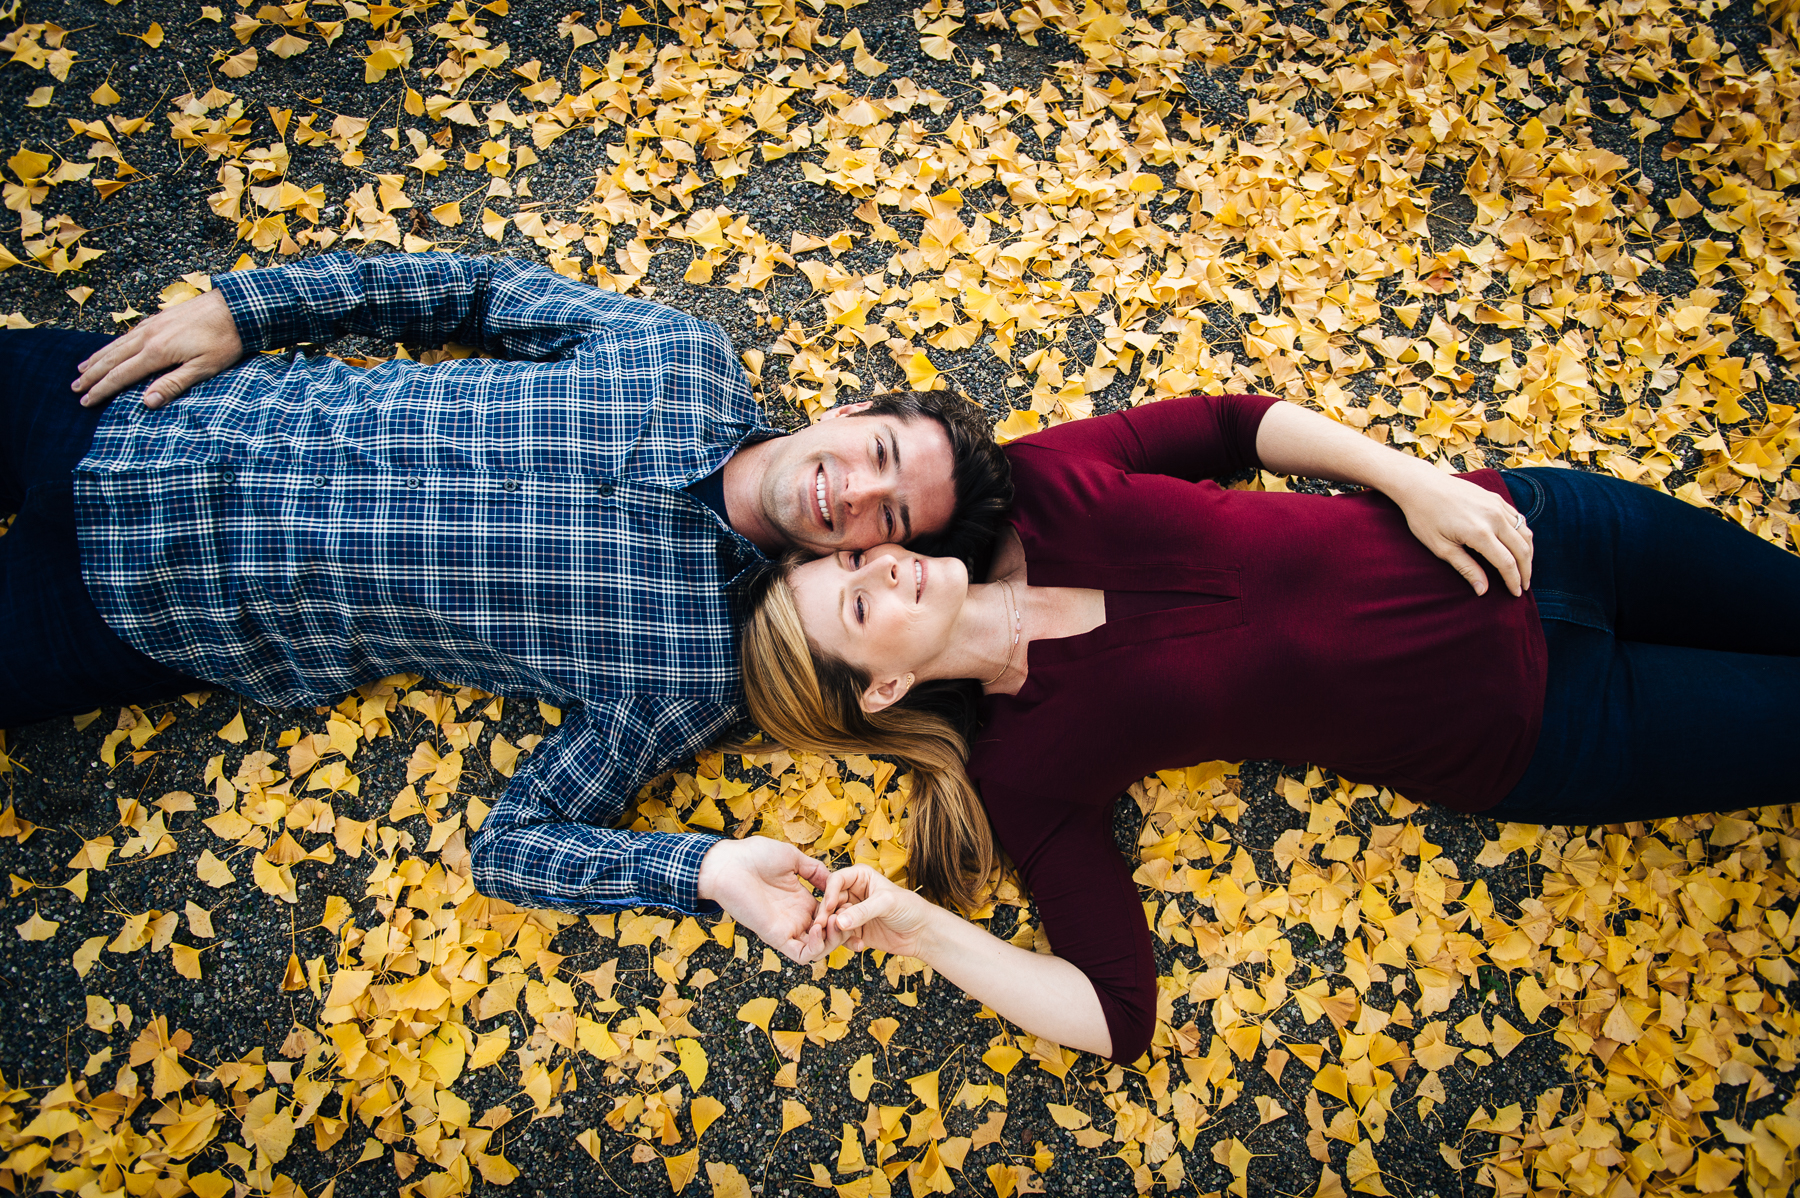 seattle-wedding-photographer-engagement-sessions-best-24